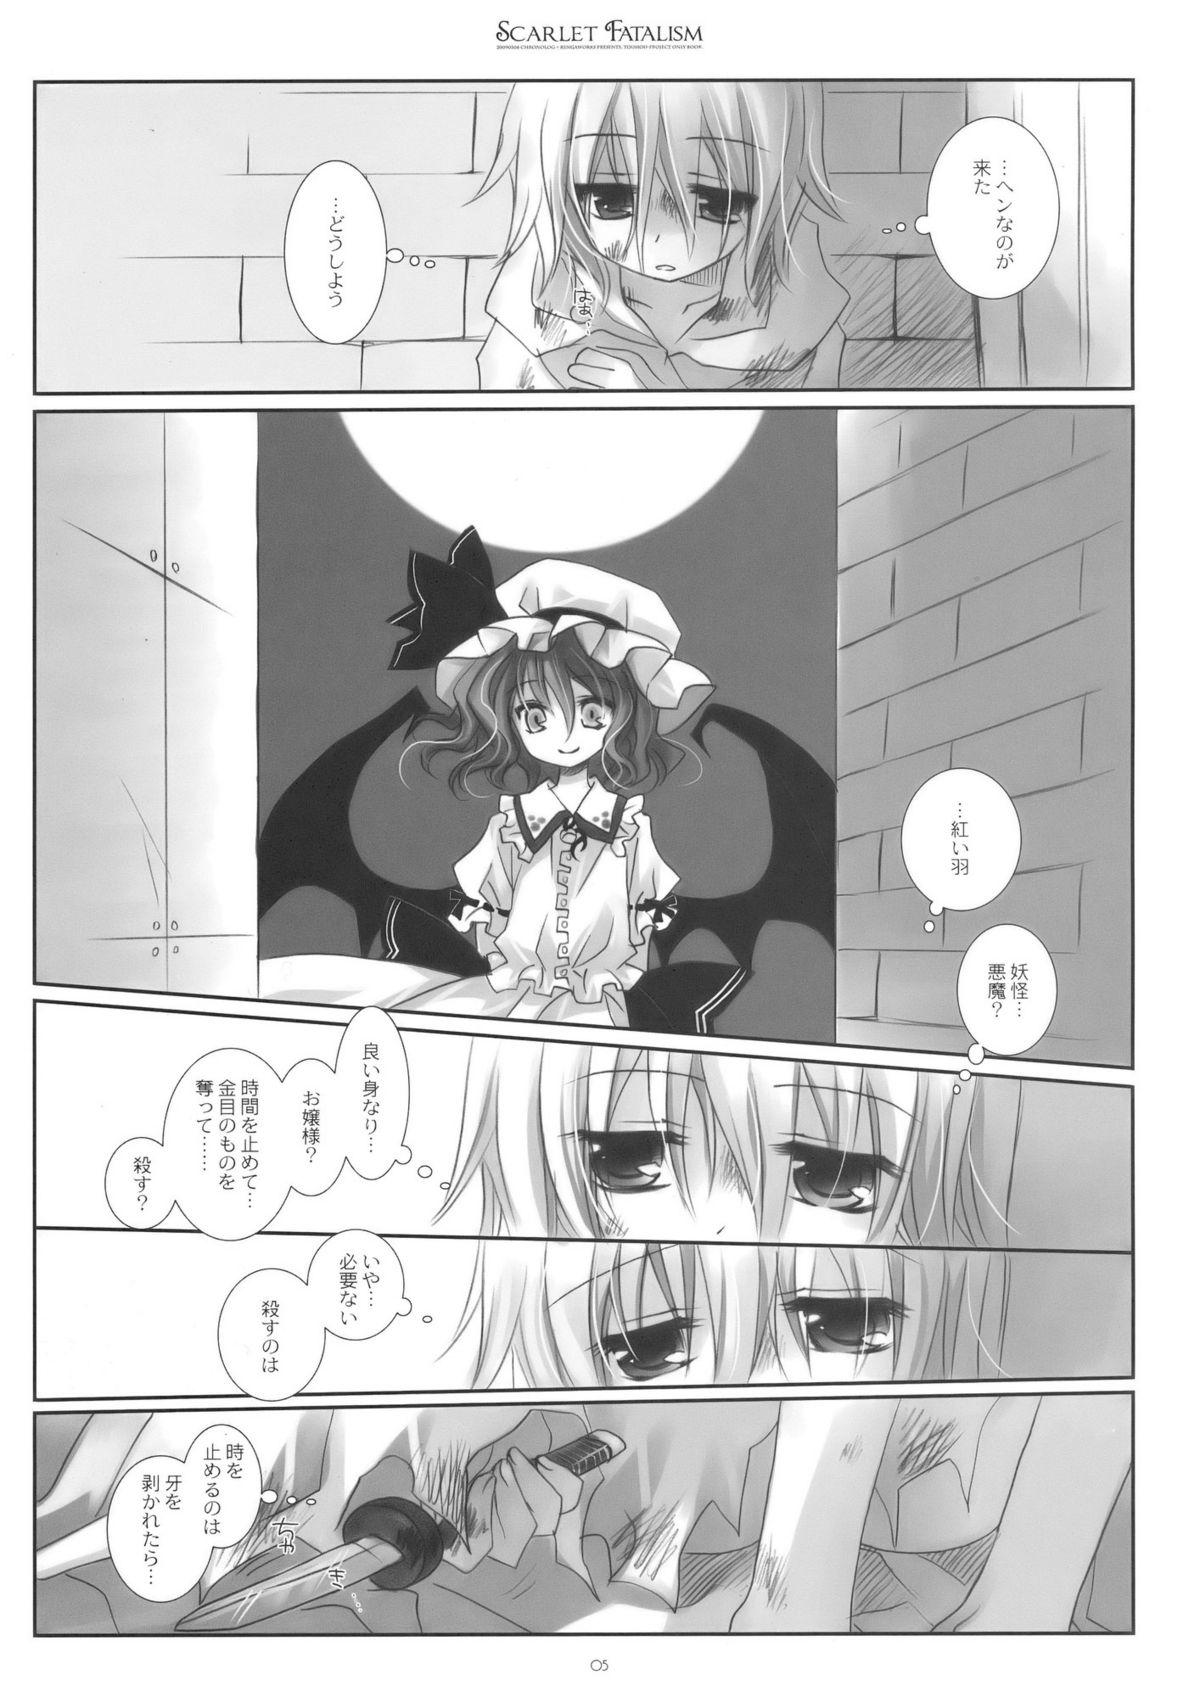 Exposed Scarlet Fatalism - Touhou project Sentones - Page 5